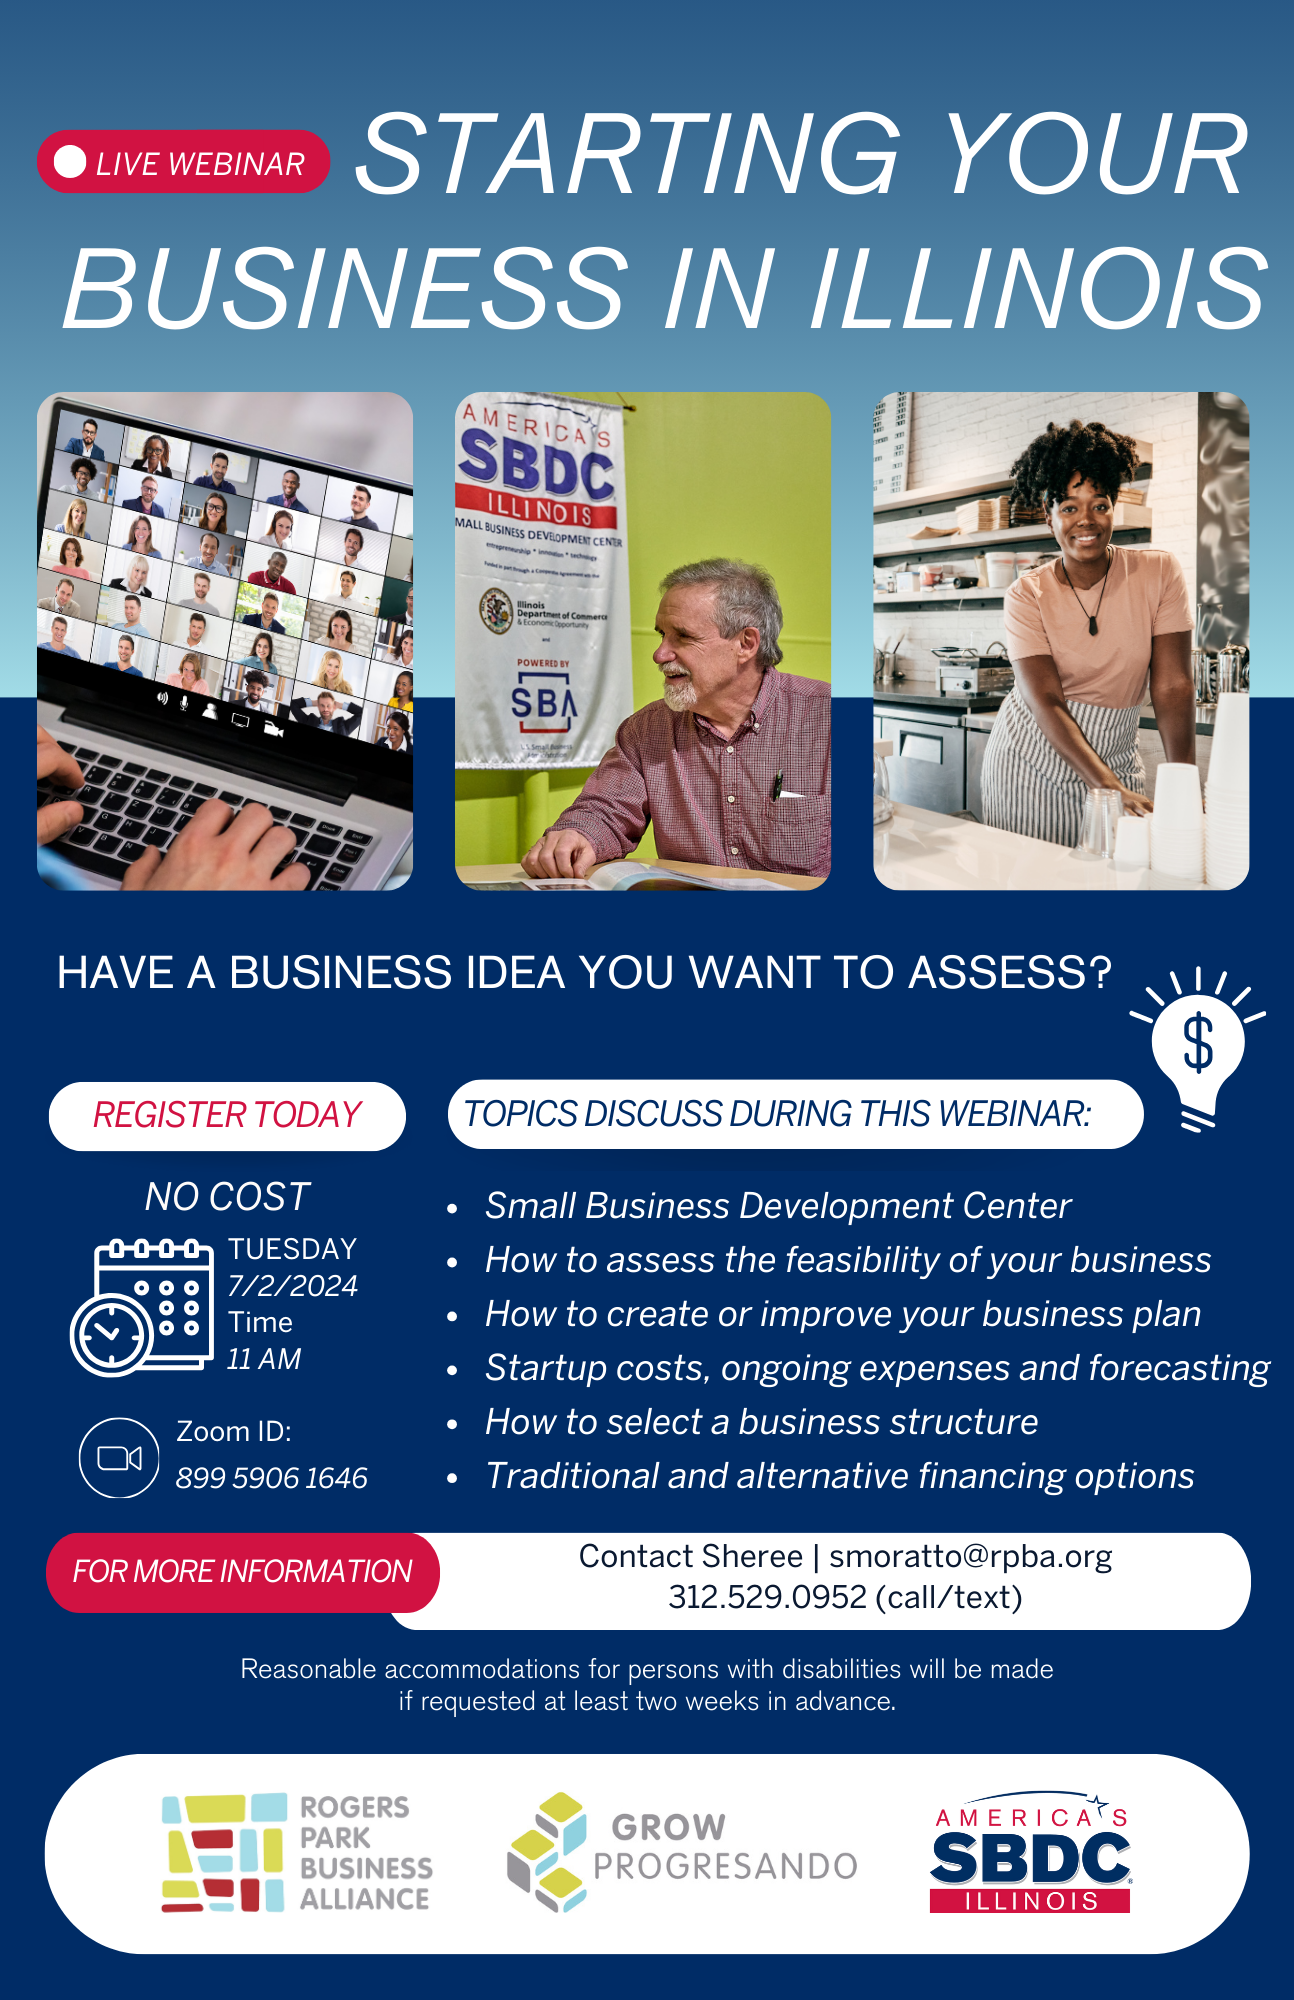 Starting Your Business in Illinois &#8211; July, rogers-park-business-alliance